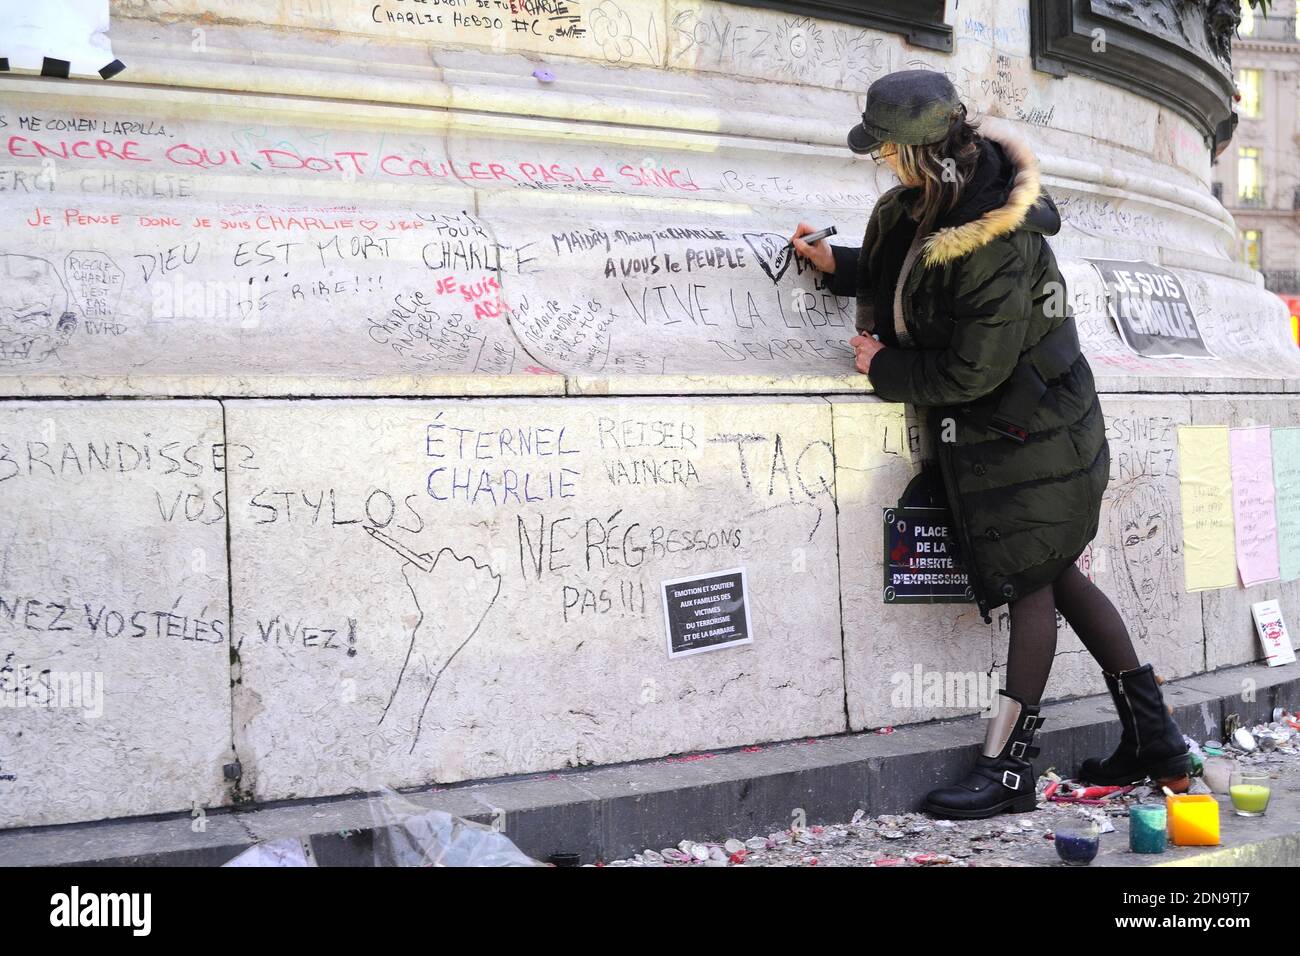 Flowers, candles, messages and pens honouring the 17 people who died in the Charlie Hebdo and the Hyper Cacher Vincennes massacres on January 07, 2015. The memorial is held at the Place de la Republique in Paris, France and is still constantly visited by mourners on January 12, 2015. Photo by Aurore Marechal/ABACAPRESS.COM Stockfoto